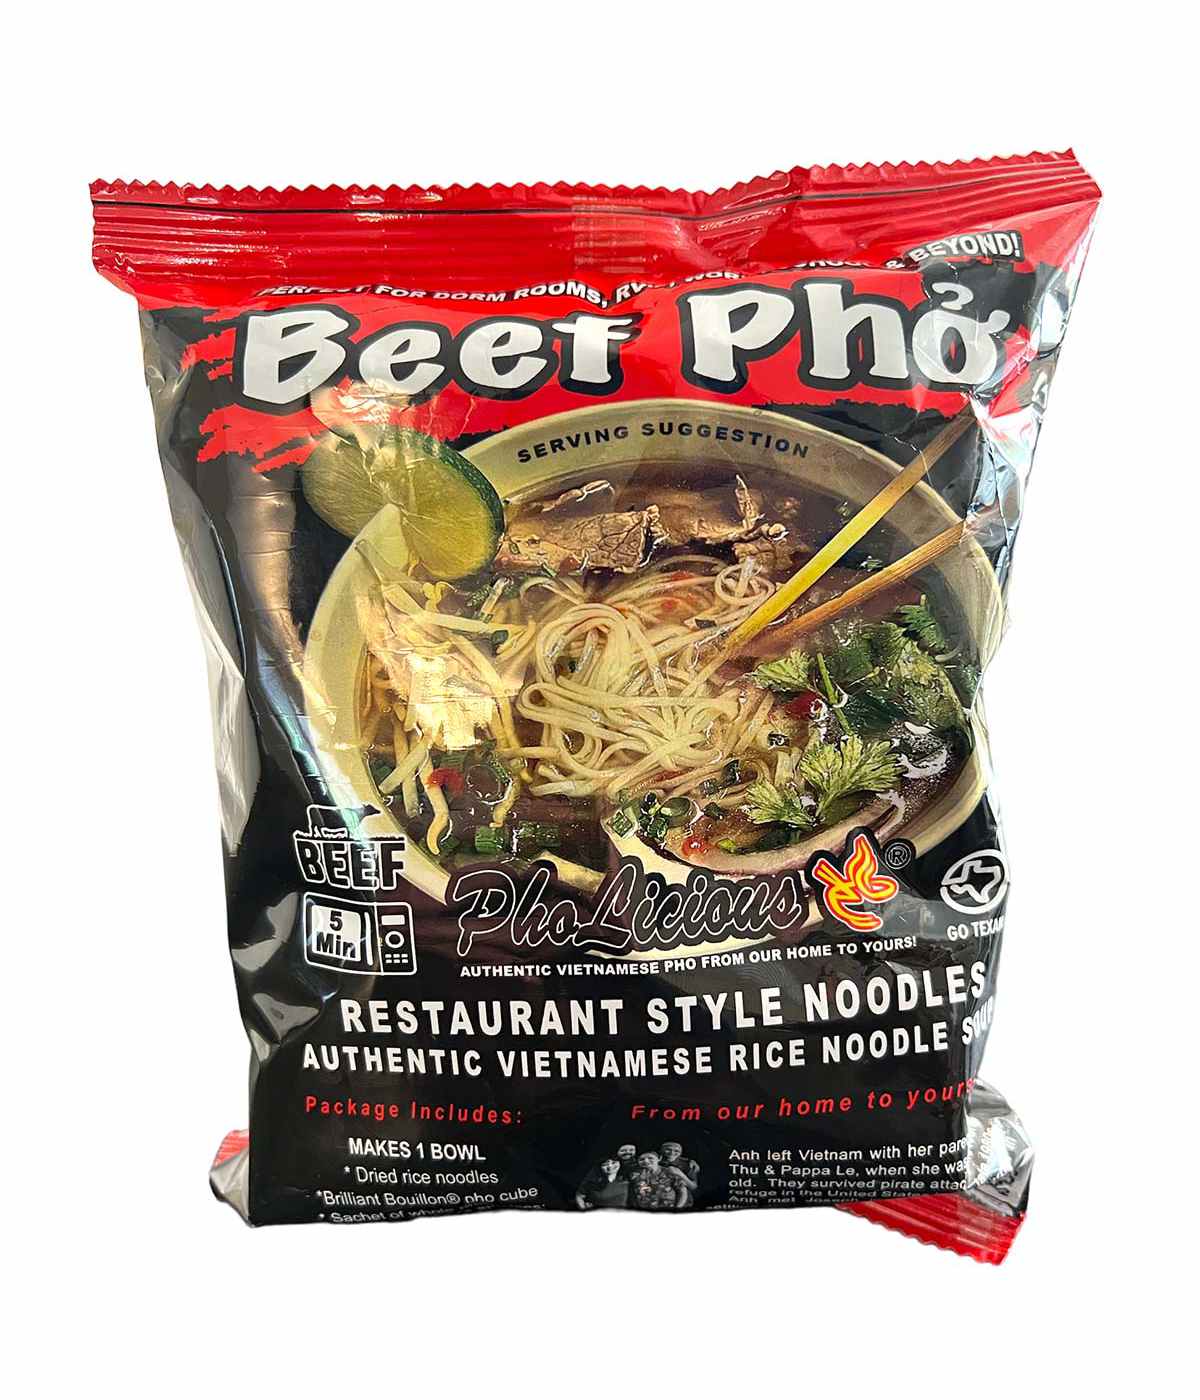 PhoLicious Instant Beef Pho; image 1 of 2